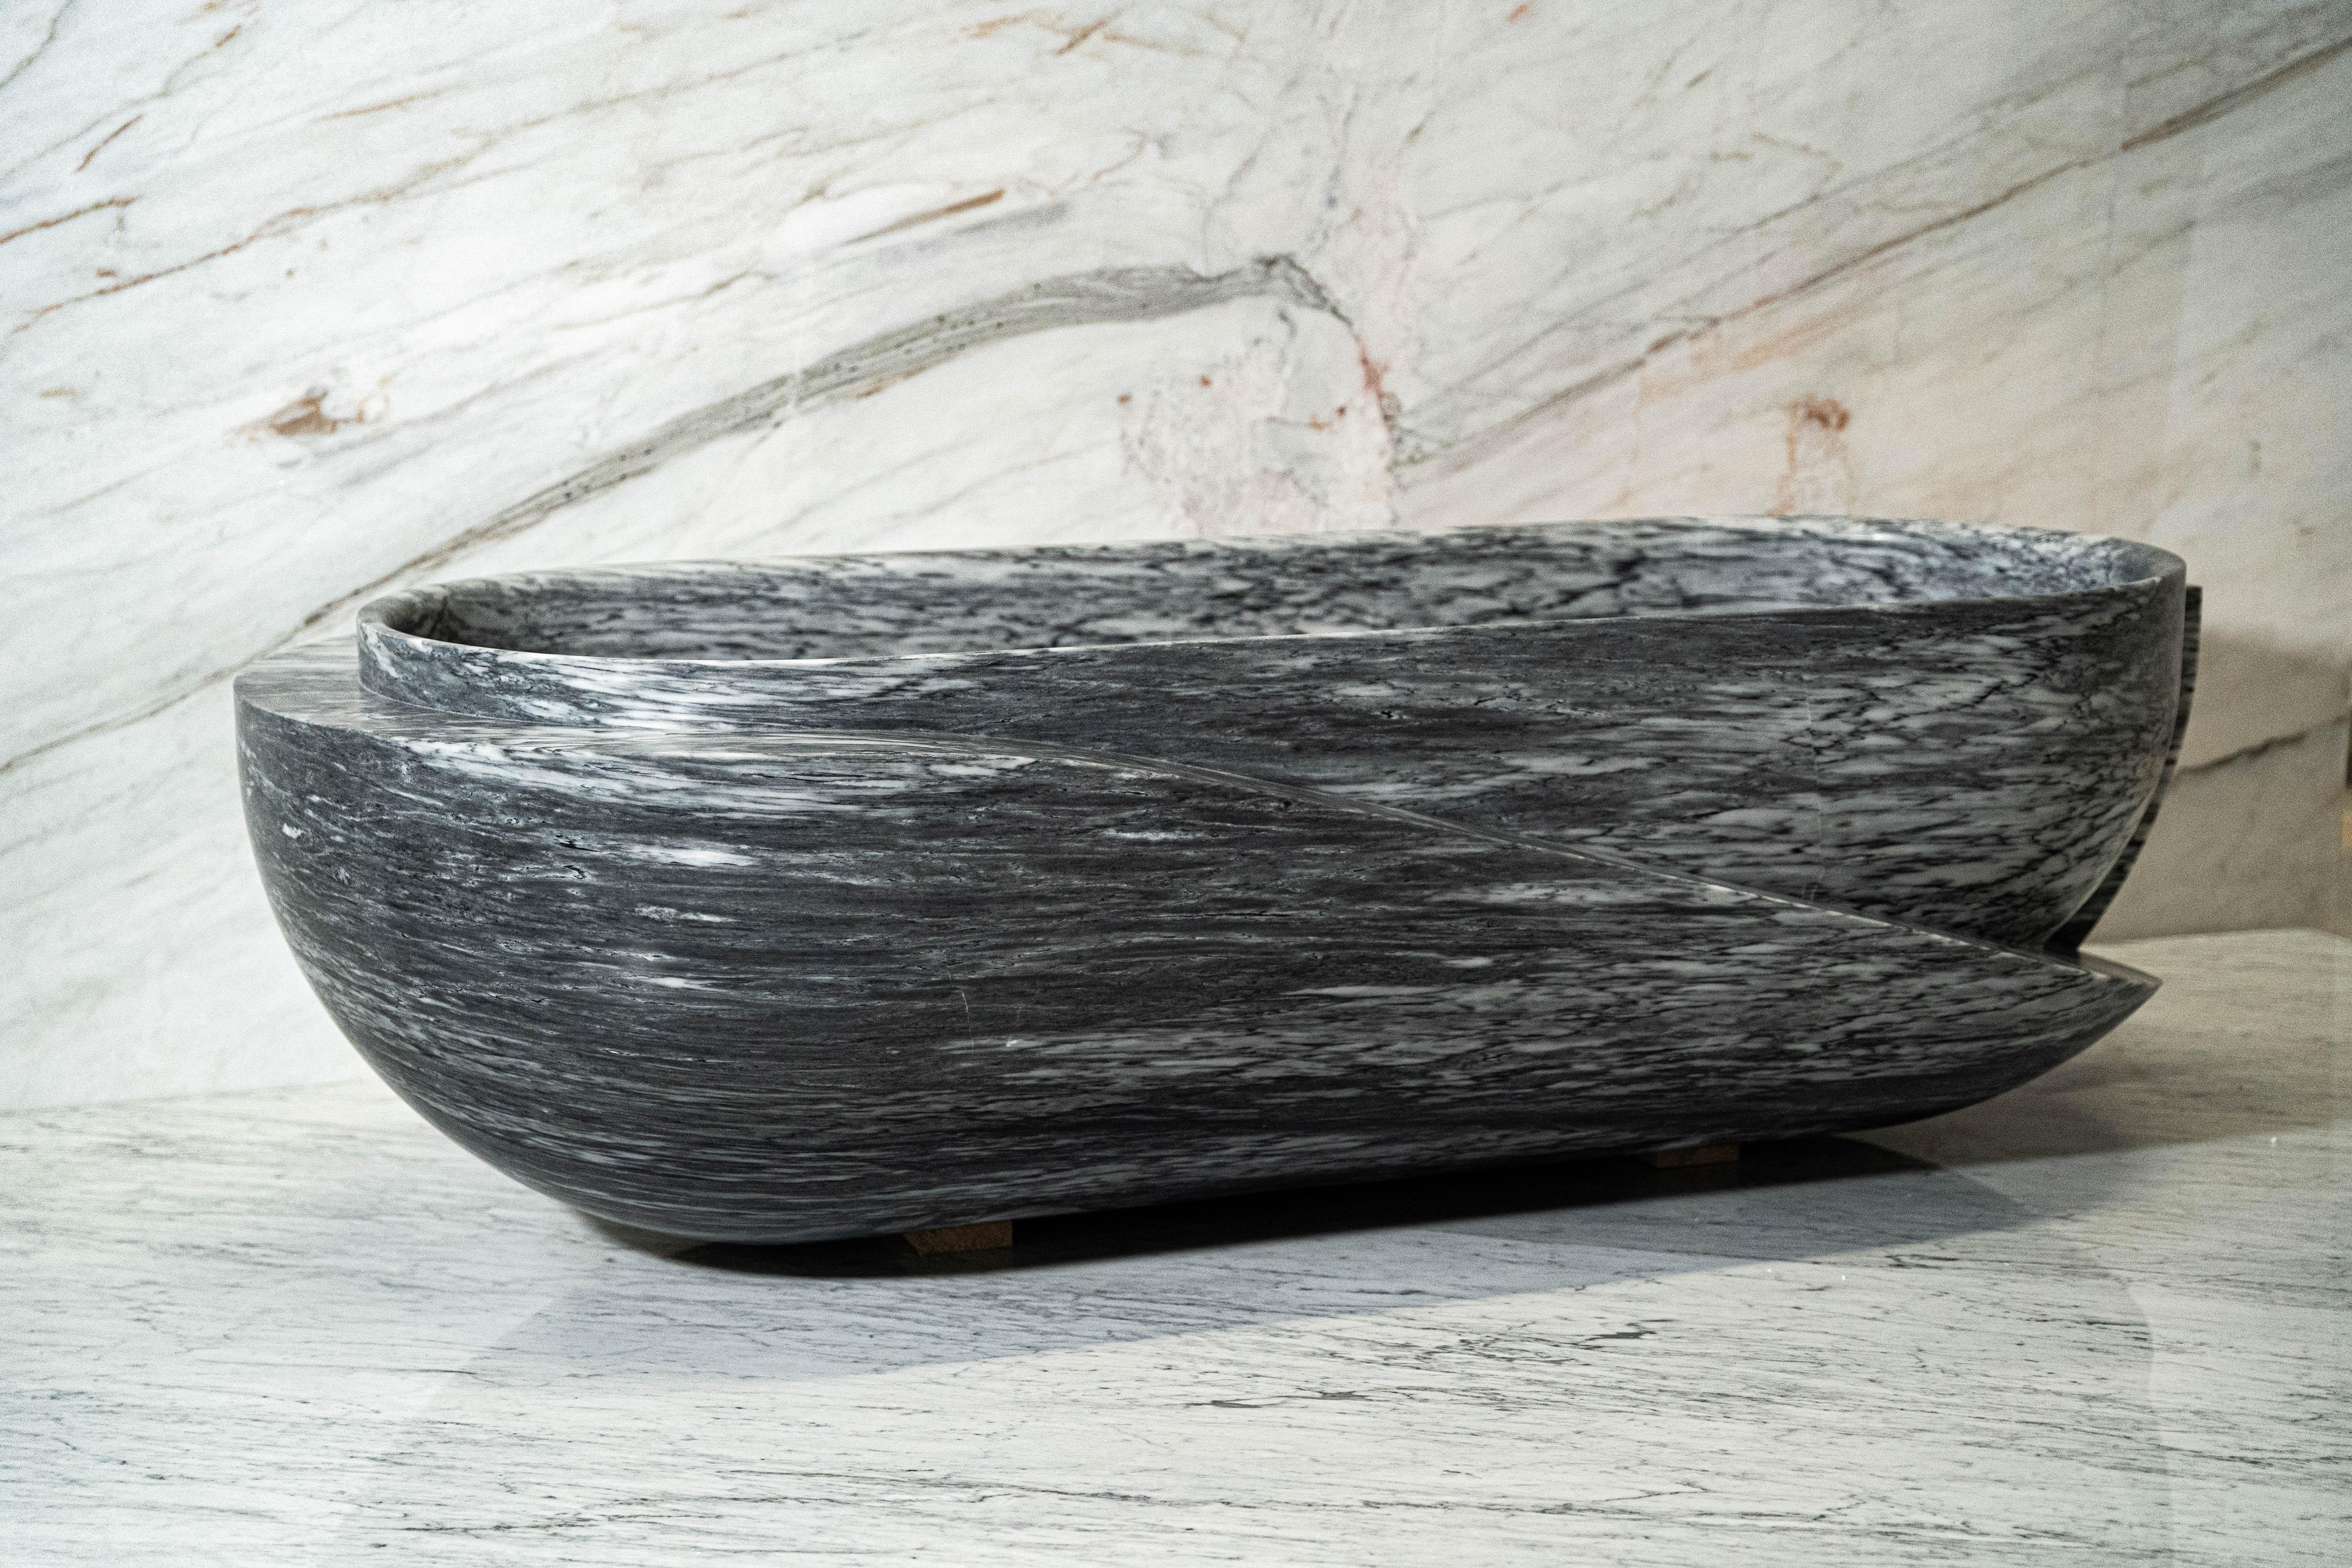 Realized in Azul Lagoa stone, this sculptural bath embodies a sensual reduction of form. The design transforms the heavy stone with a beguiling levity. Inspirations draw from a dreamlike interpretation of the past from the perspective of the